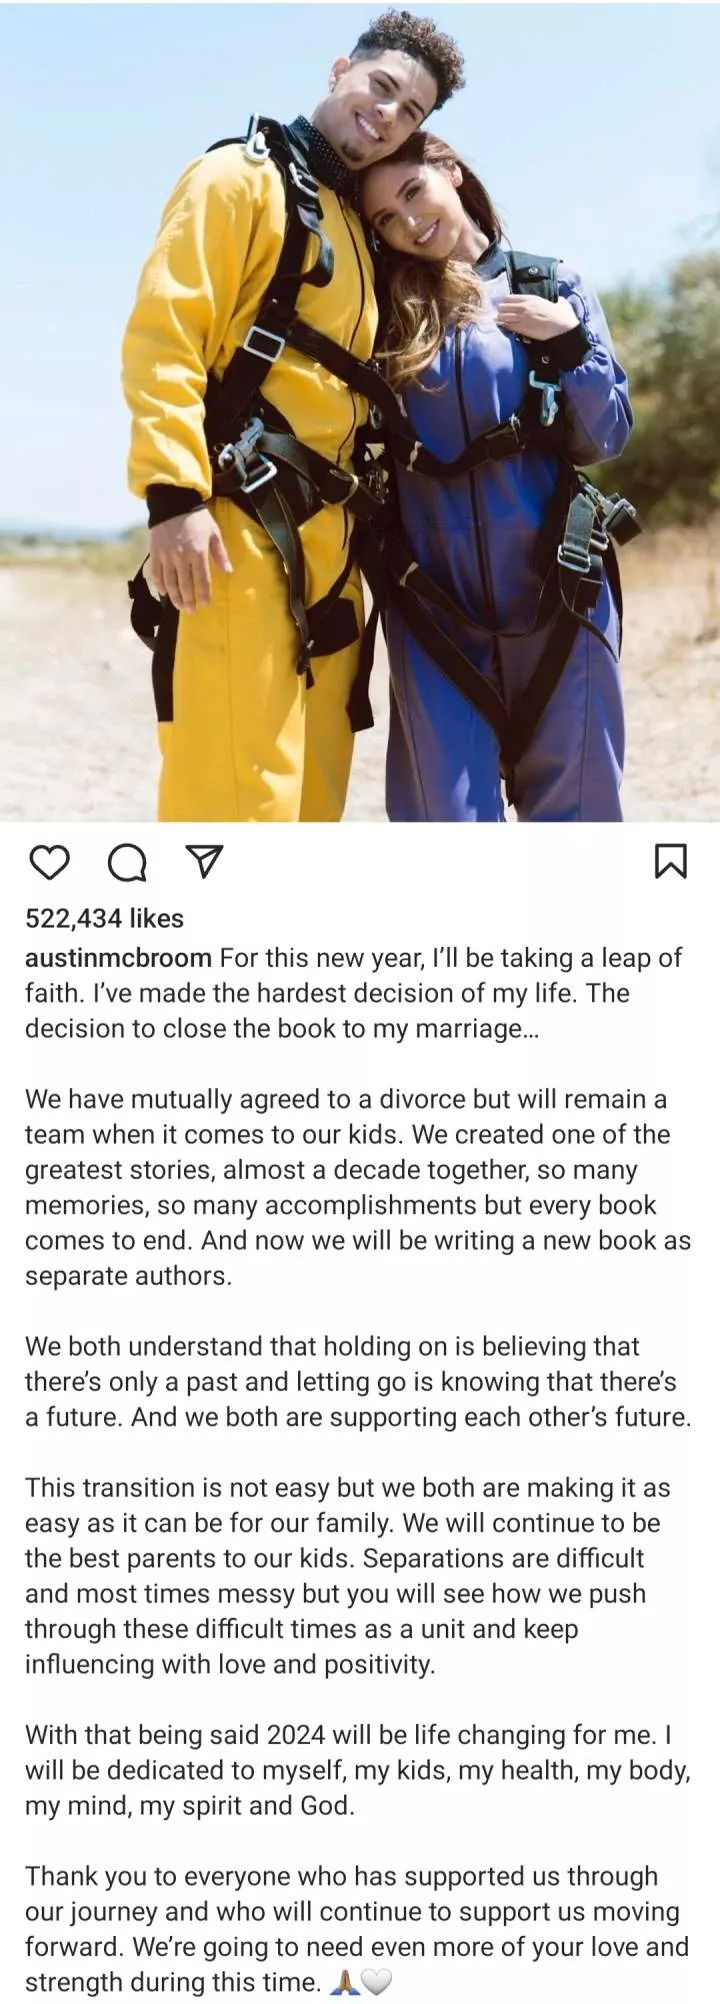 Popular YouTube couple, The ACE family announce divorce